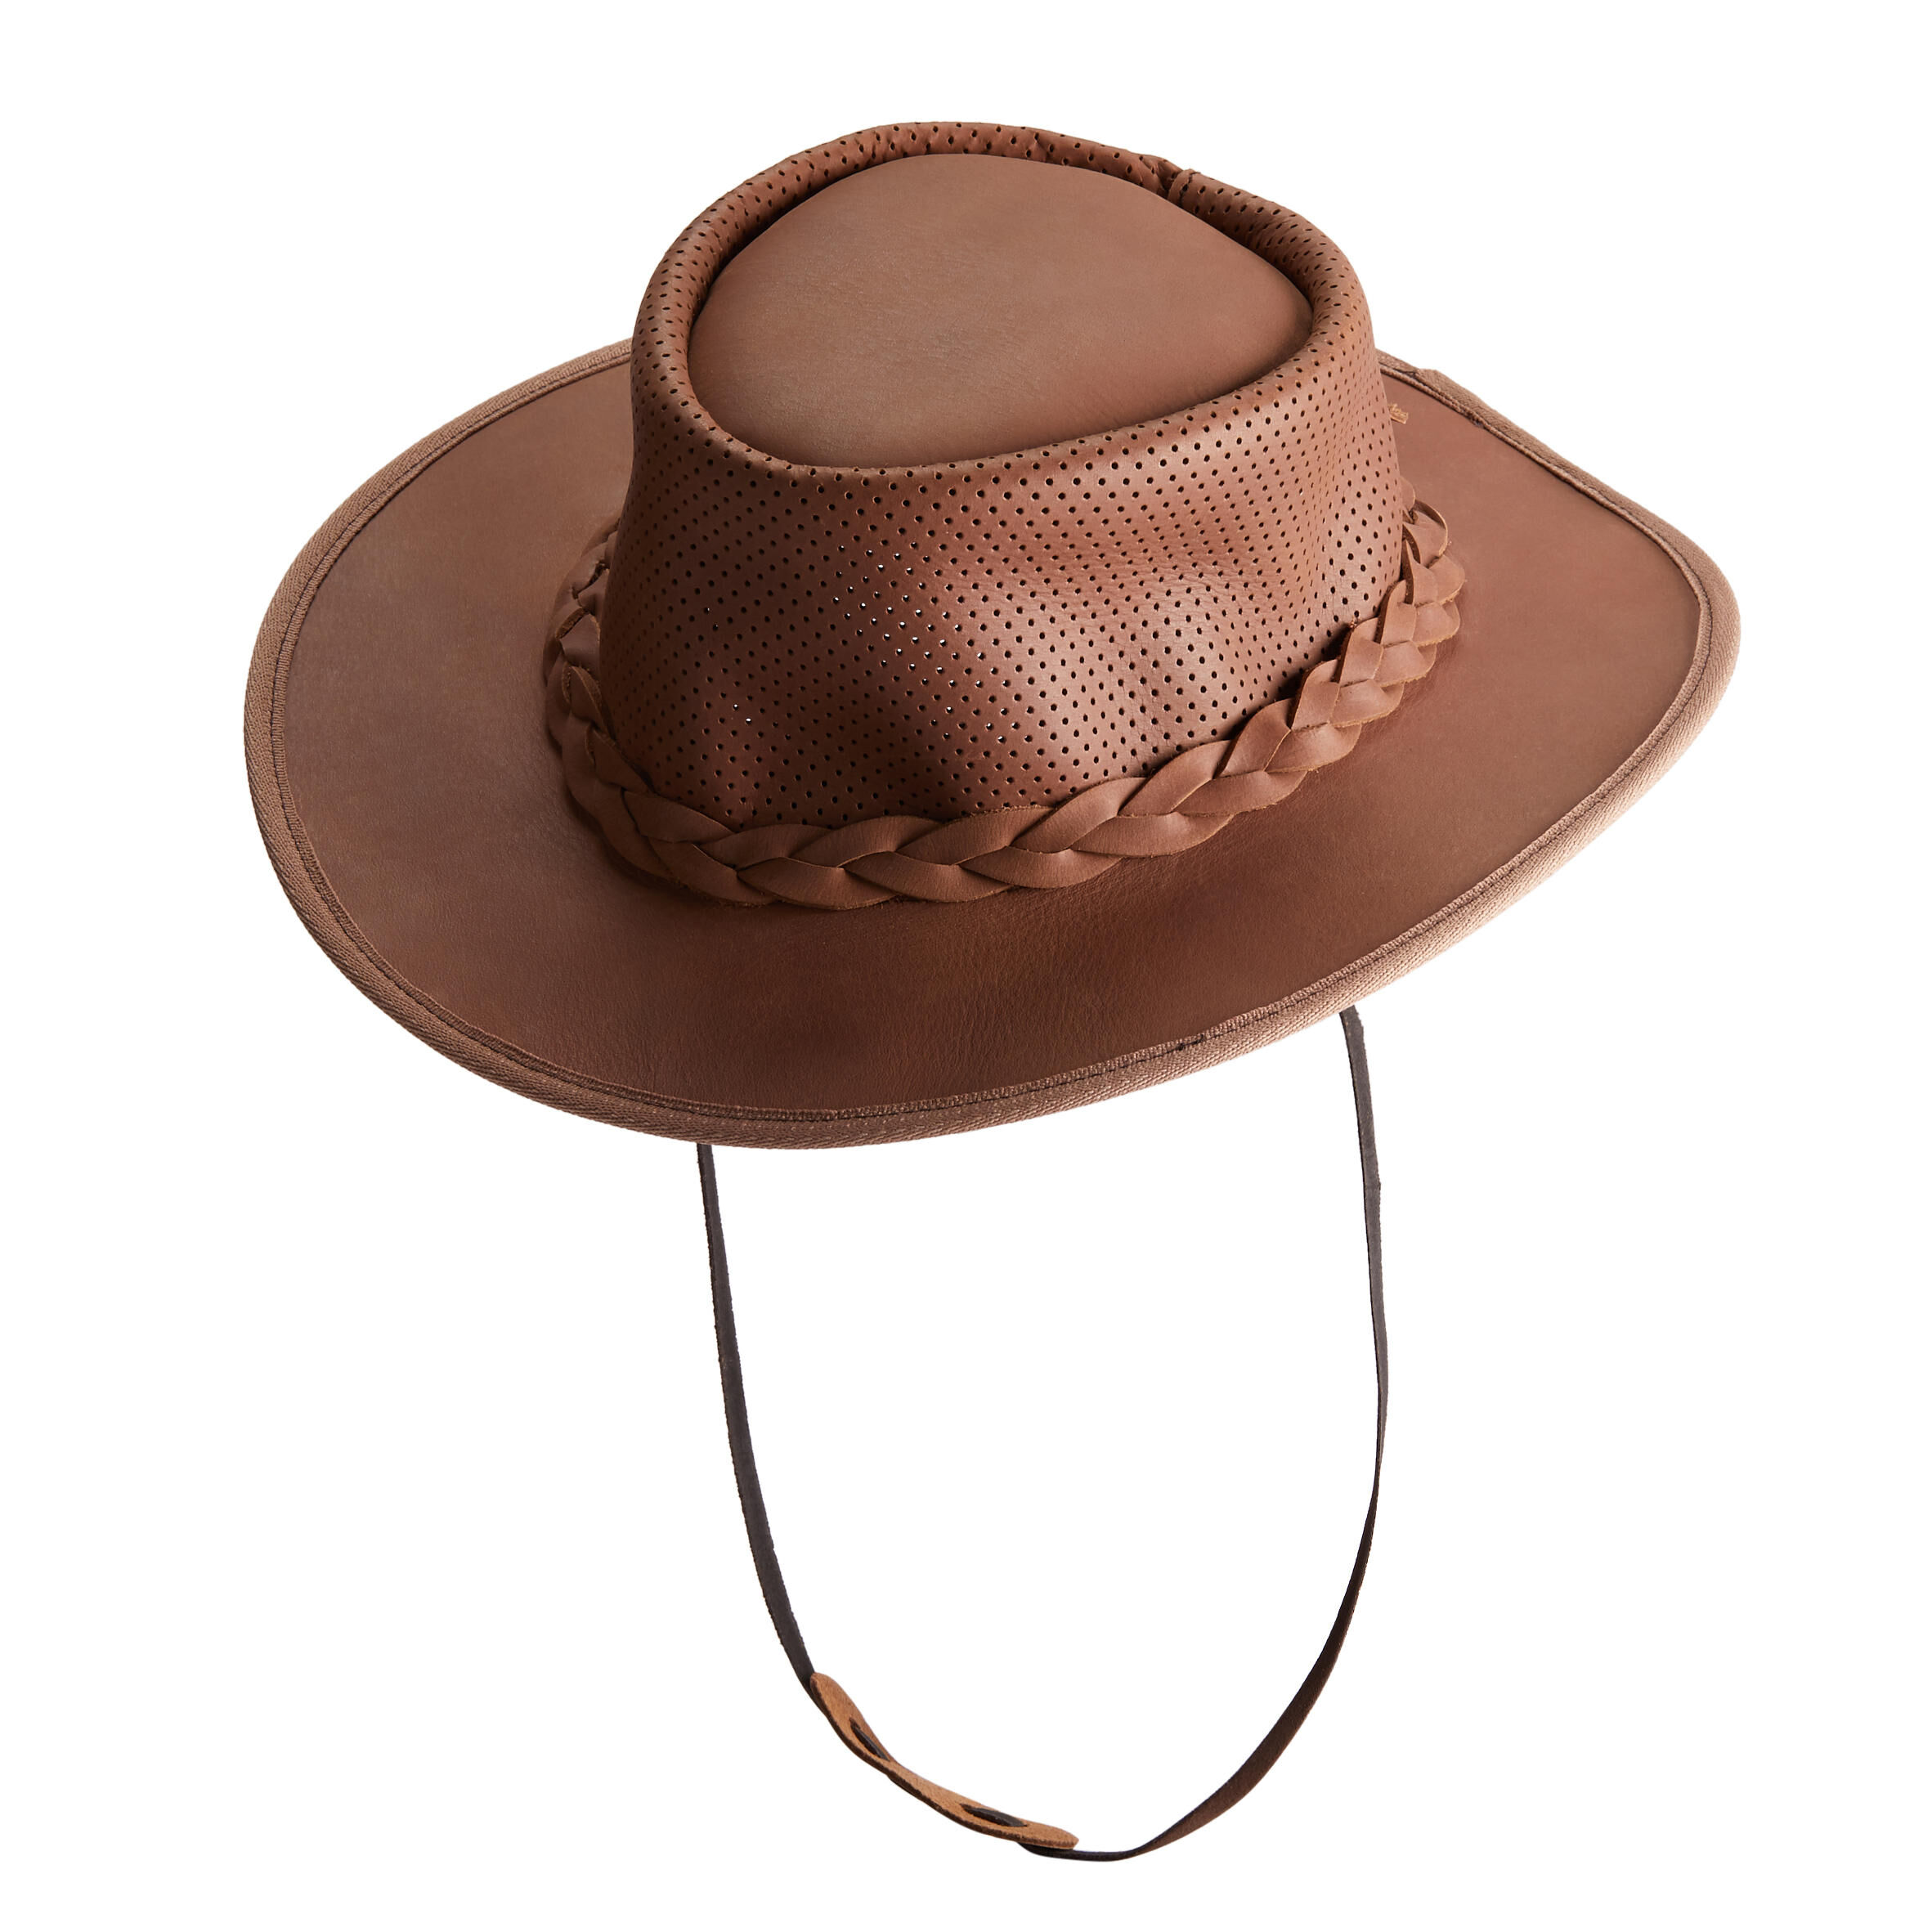 NO BRAND Crossover Adult Horse Riding Hat - Brown